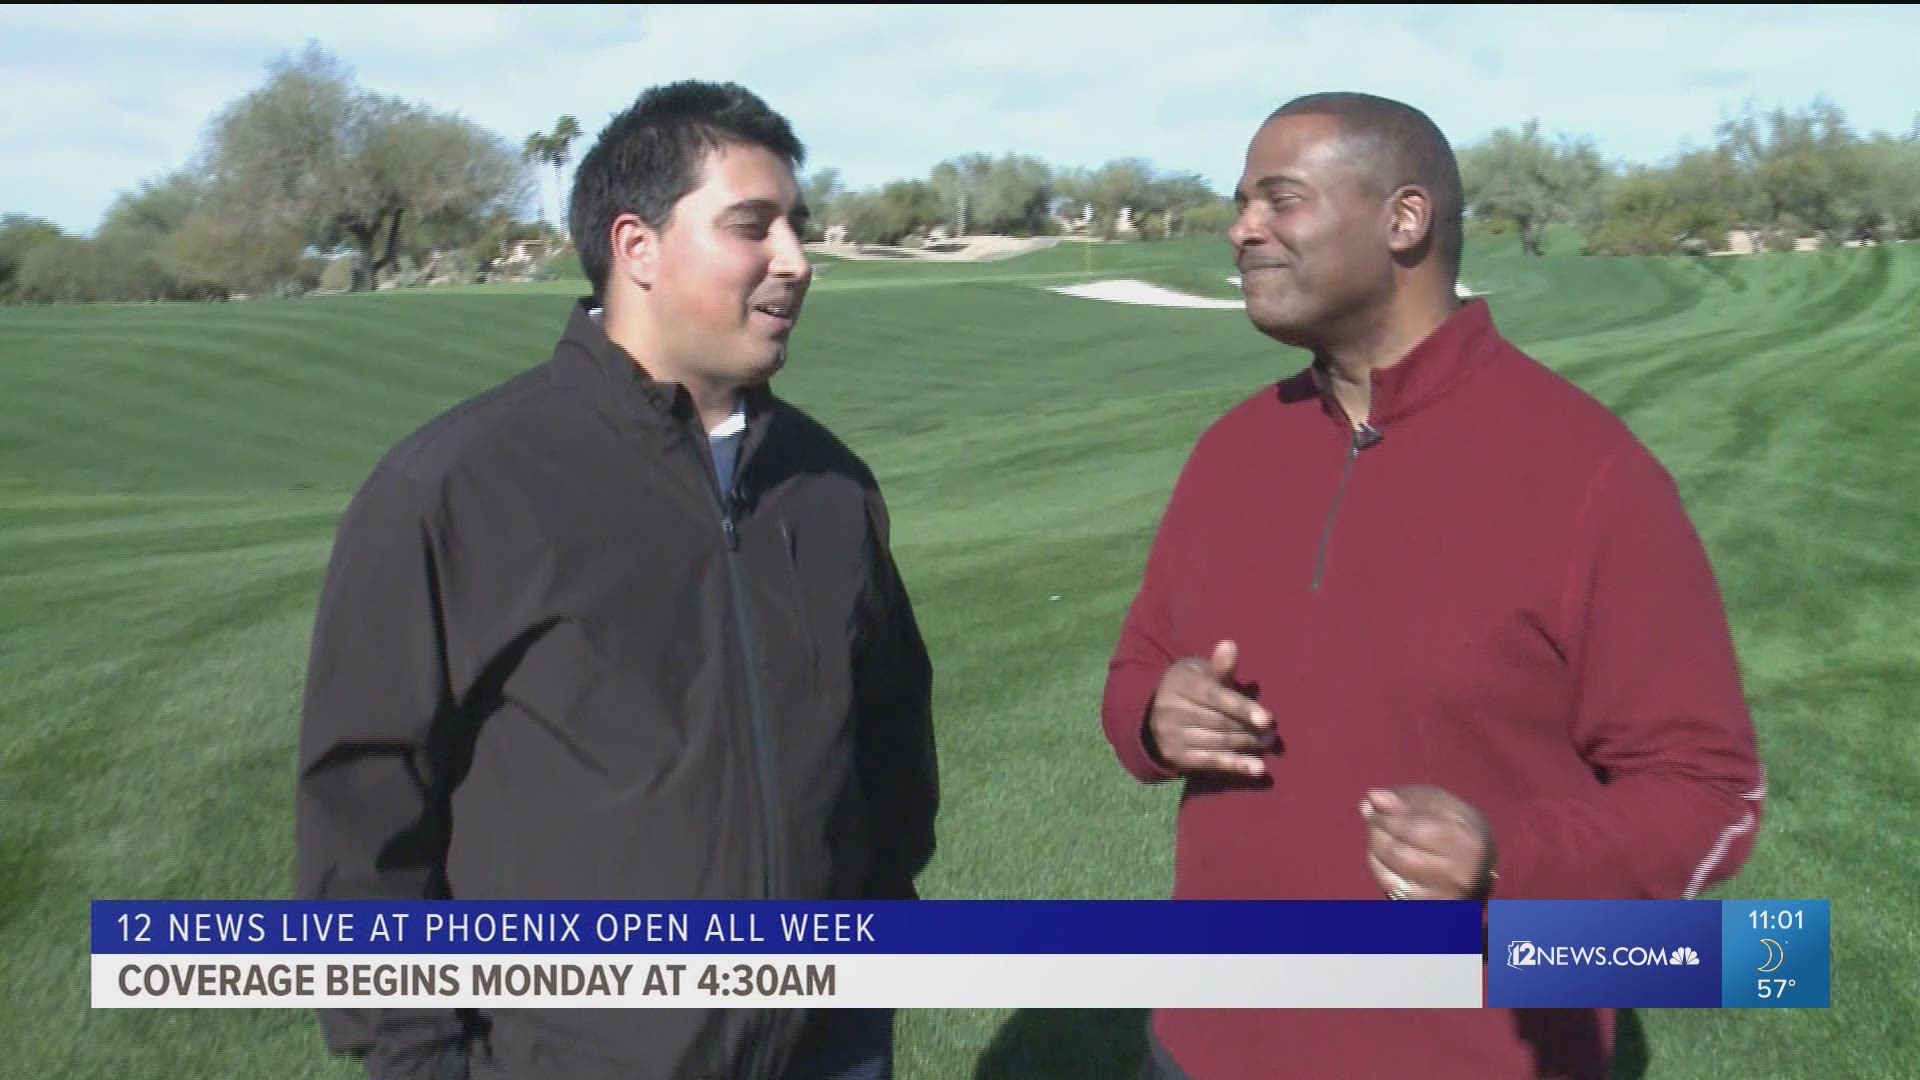 The 12 Sports Golf Show with Bruce Cooper, Cameron Cox, Torey Lovullo, A.Q. Shipley, Seth Joyner and Mike Turner at TPC Scottsdale ends with some bloopers.